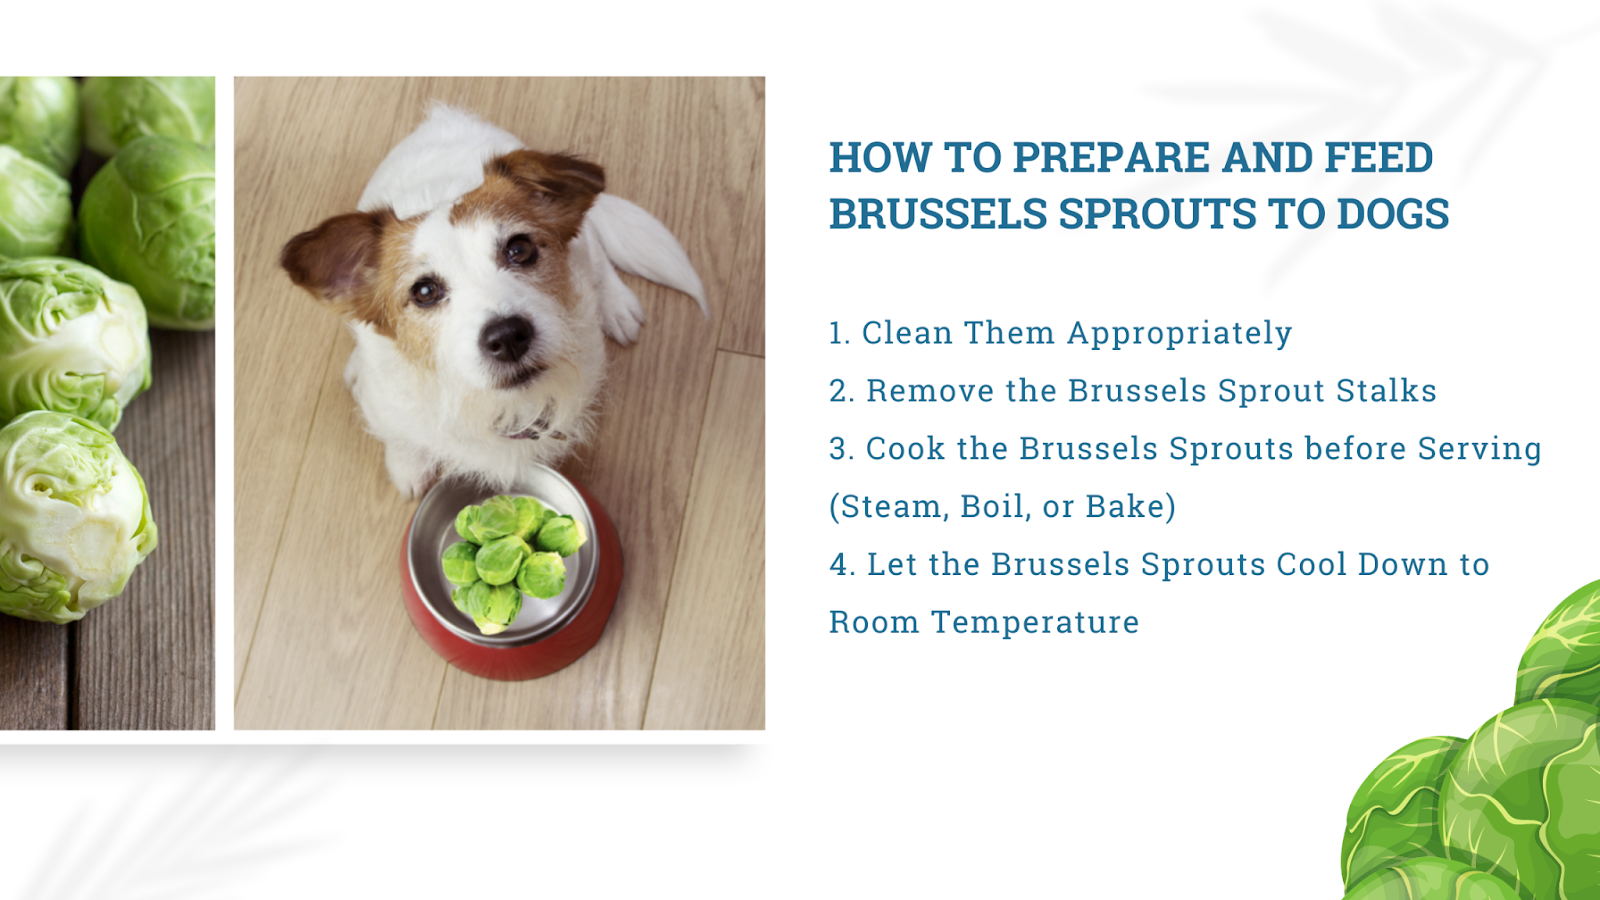 How to prepare and feed brussels sprouts to dogs